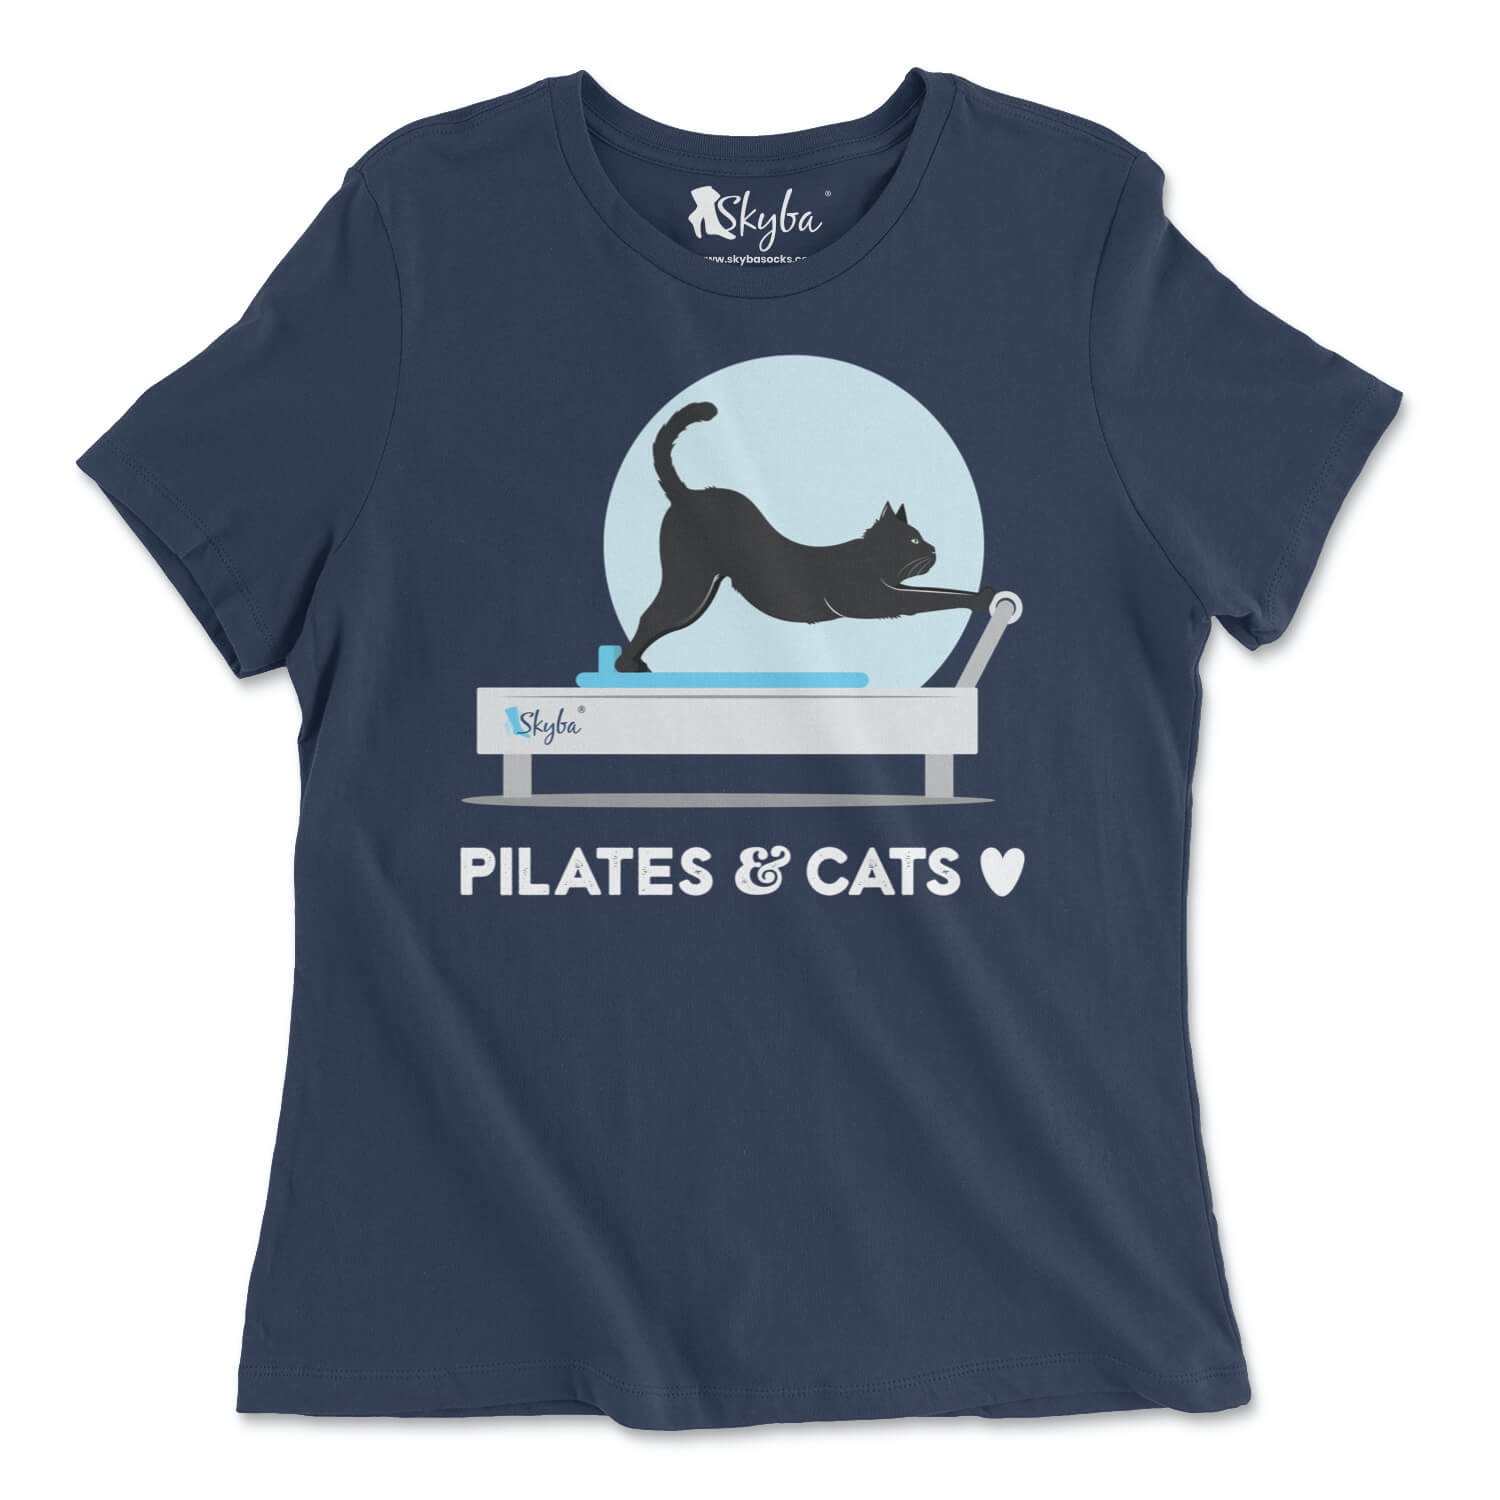 "Pilates & Cats ❤️" Stretching Cat on Reformer - Classic Tee Skyba T-Shirt